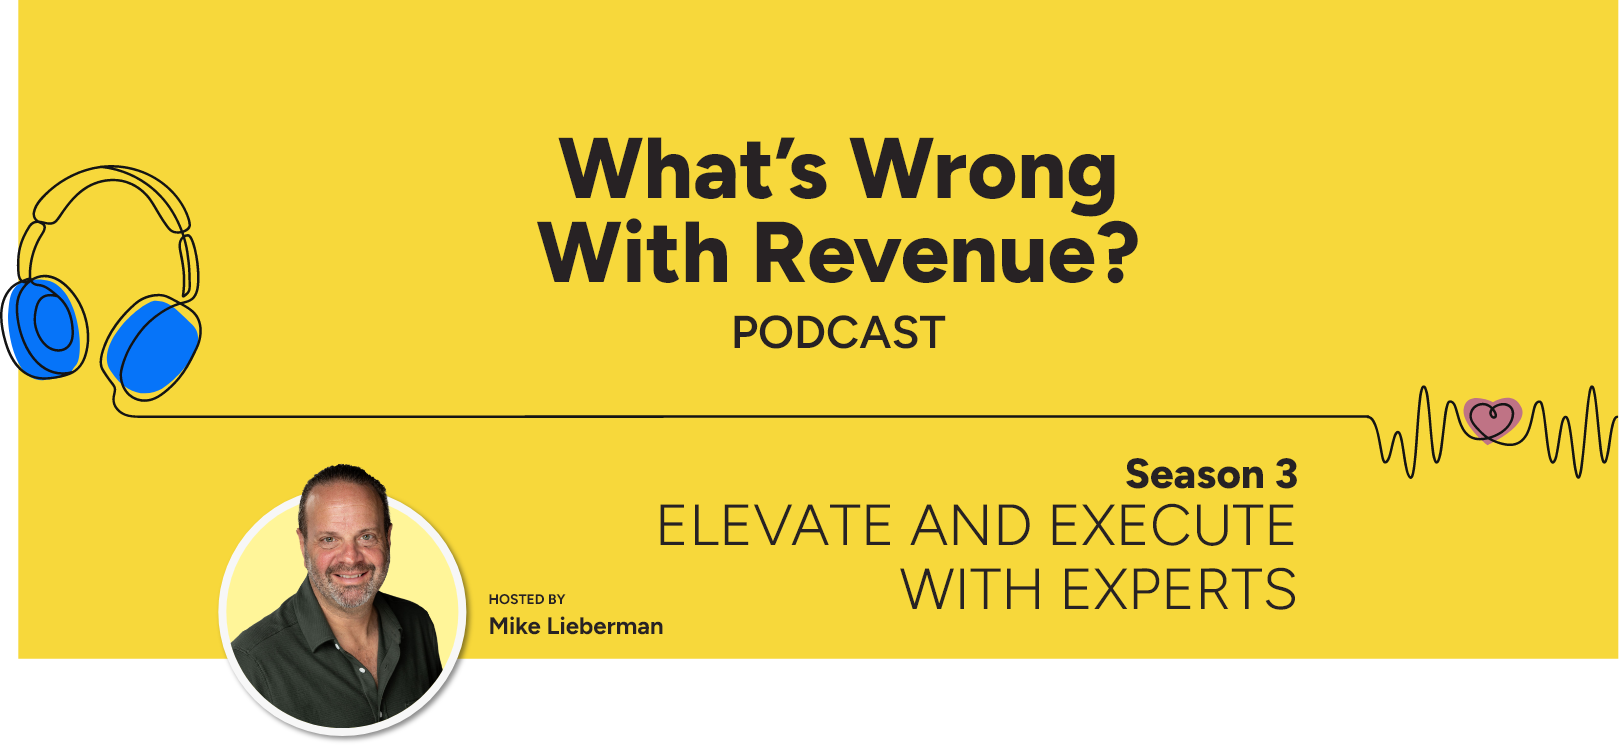 What's Wrong With Revenue? Podcast – Season 3: Elevate and Execute With Experts